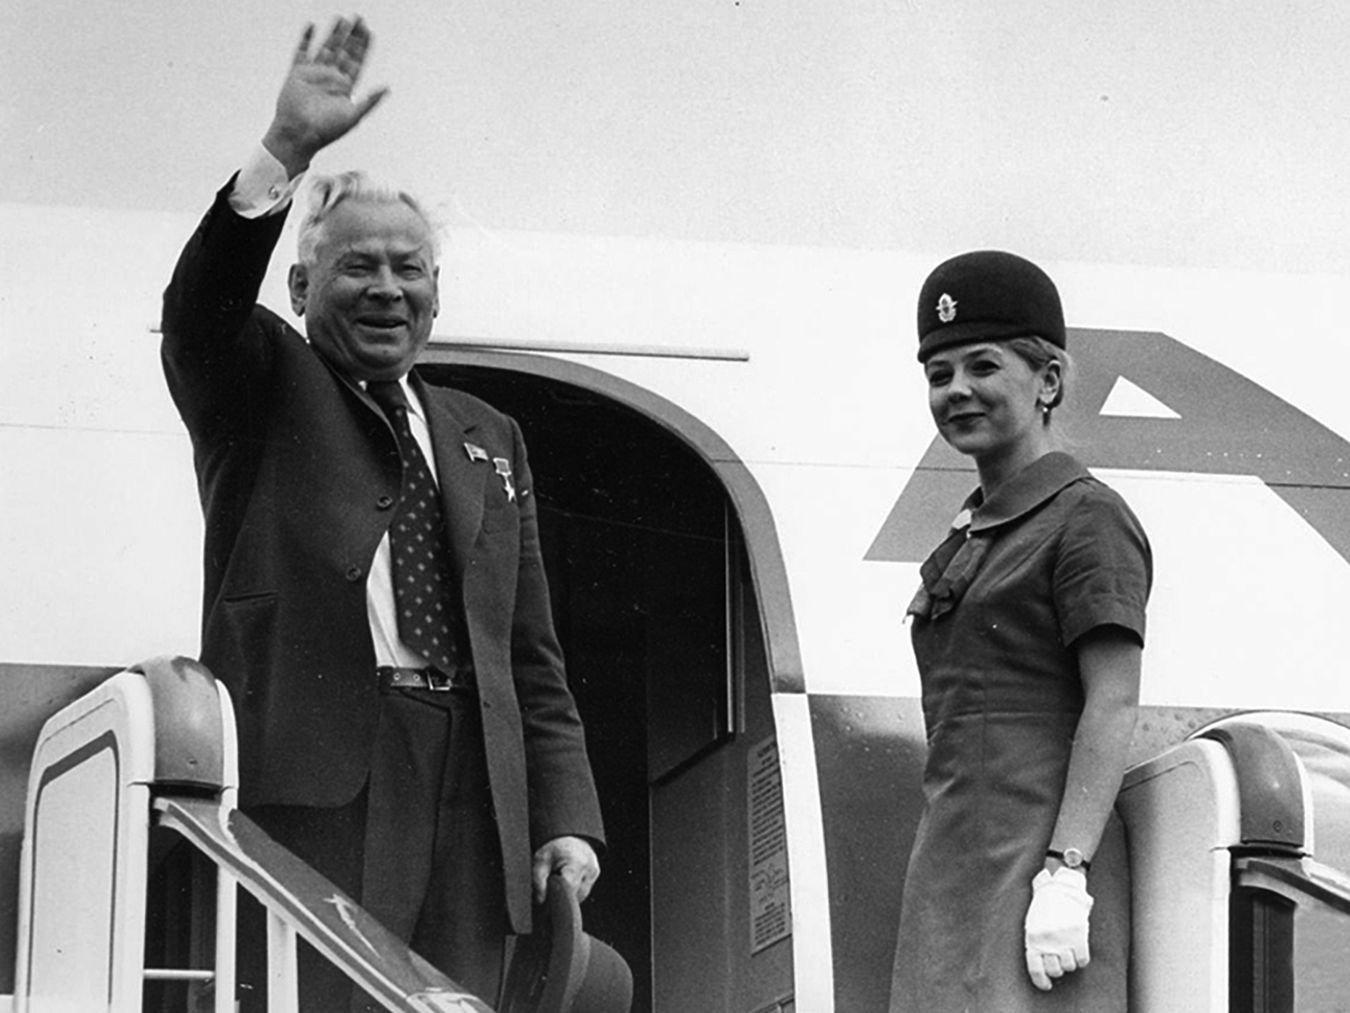 Image of smiling man waving farewell as he boards a plane, a stewardess at his side.